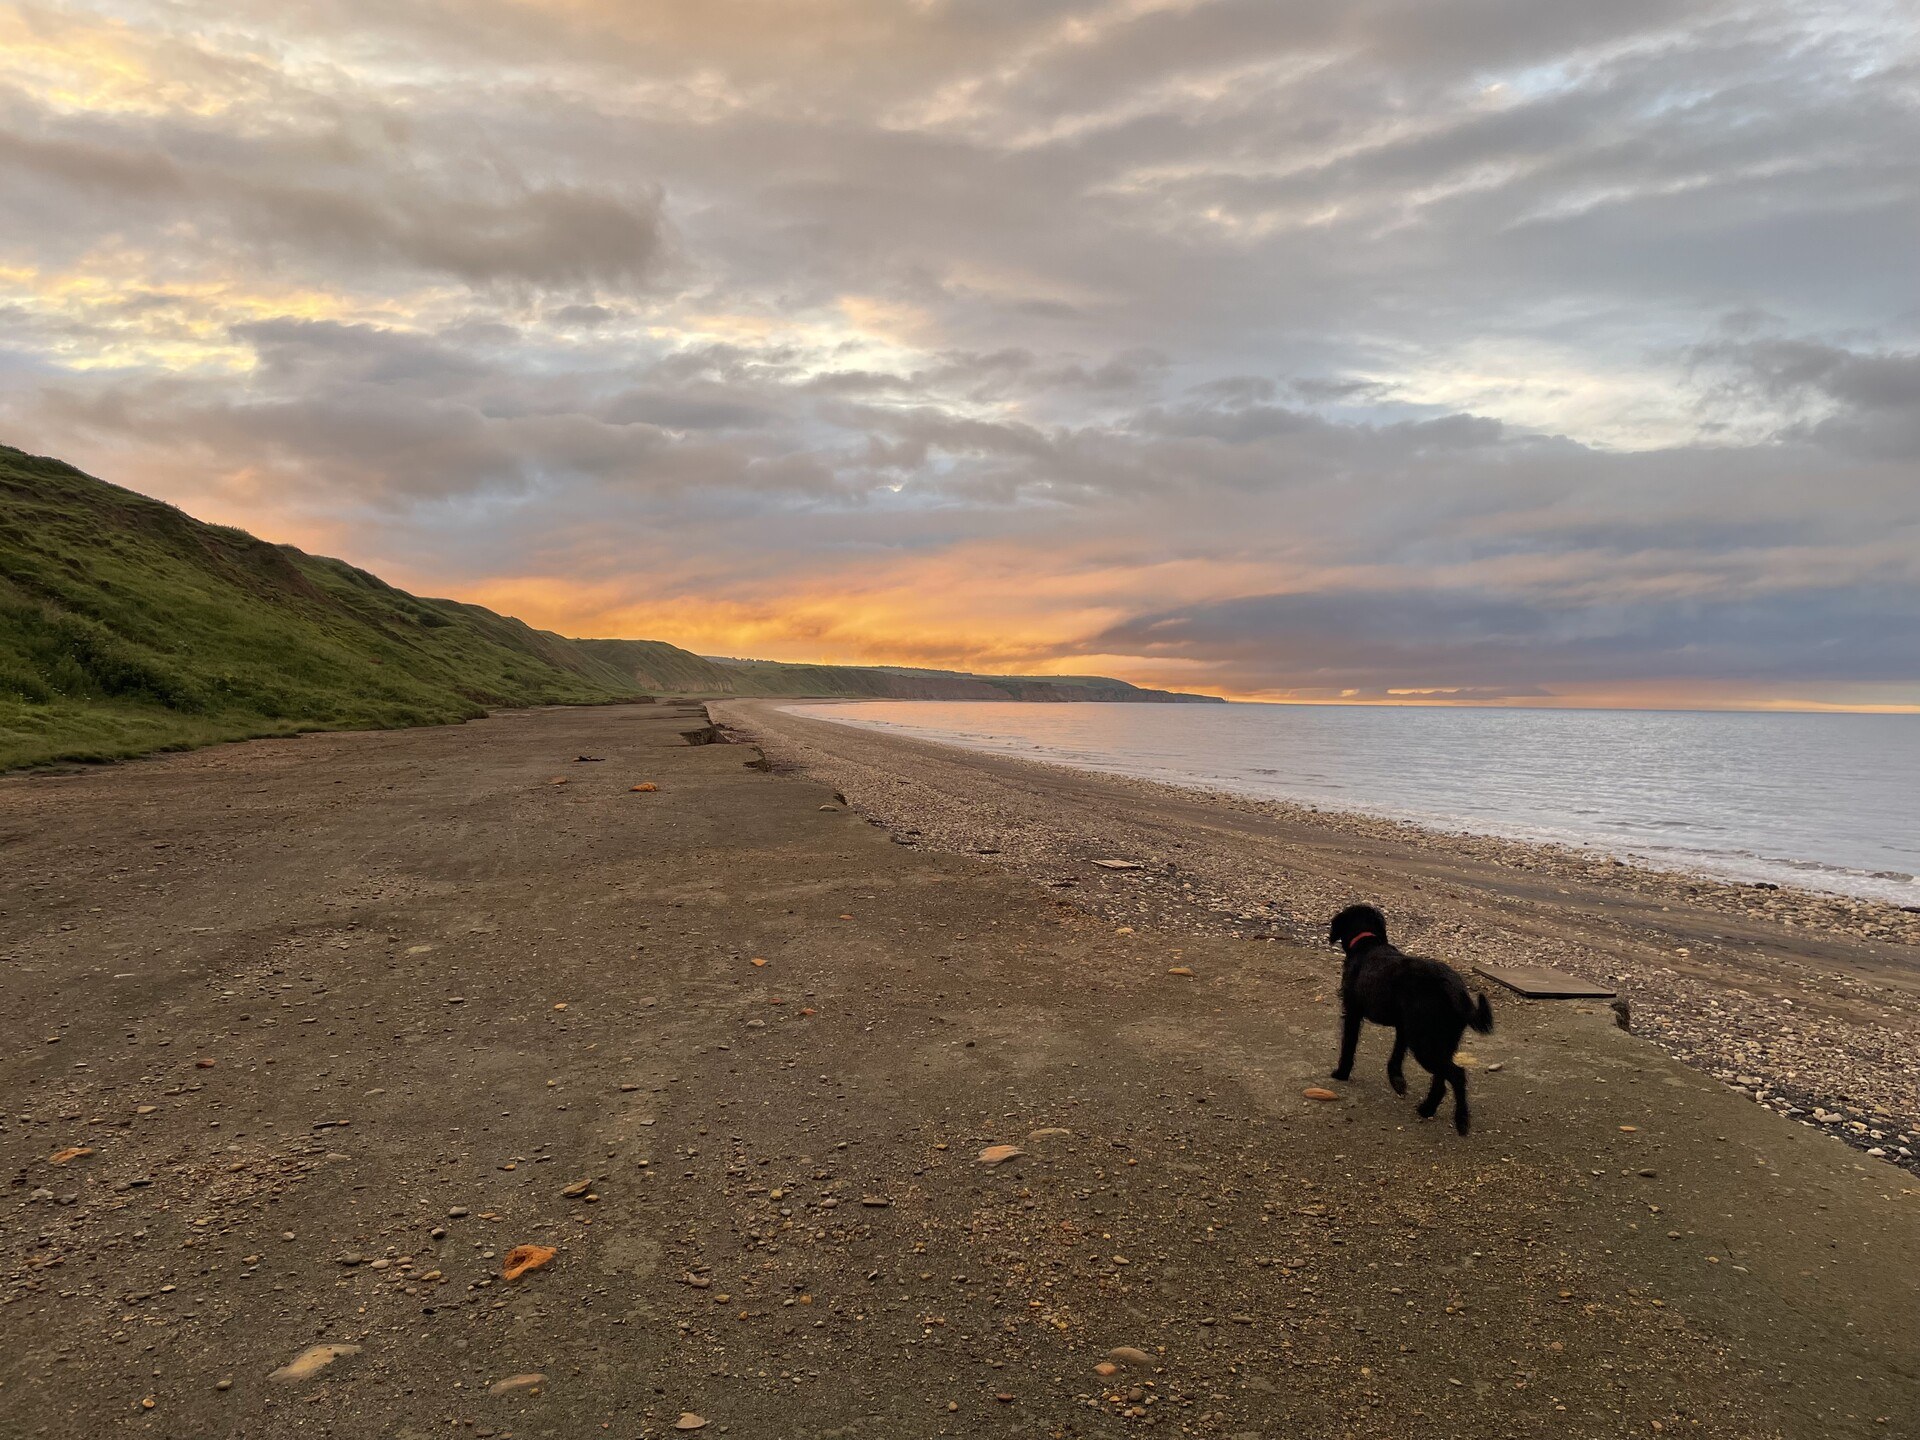 Ghyll wandering down the beach with a sunset off in the distance